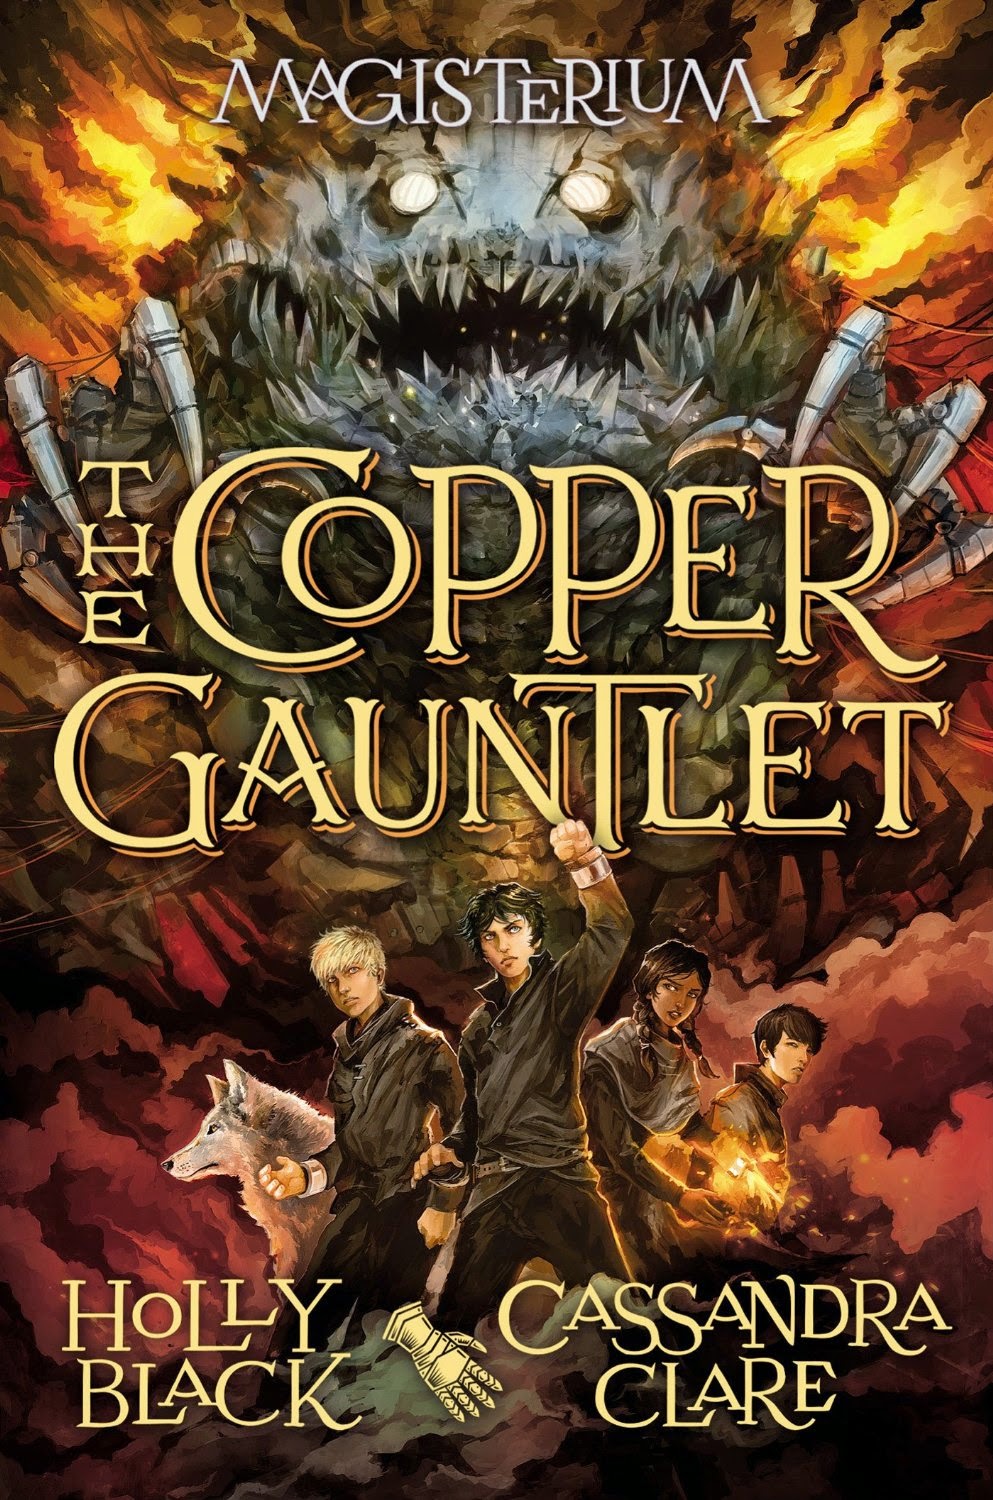 The Copper Gauntlet by Holly Black & Cassandra Clare